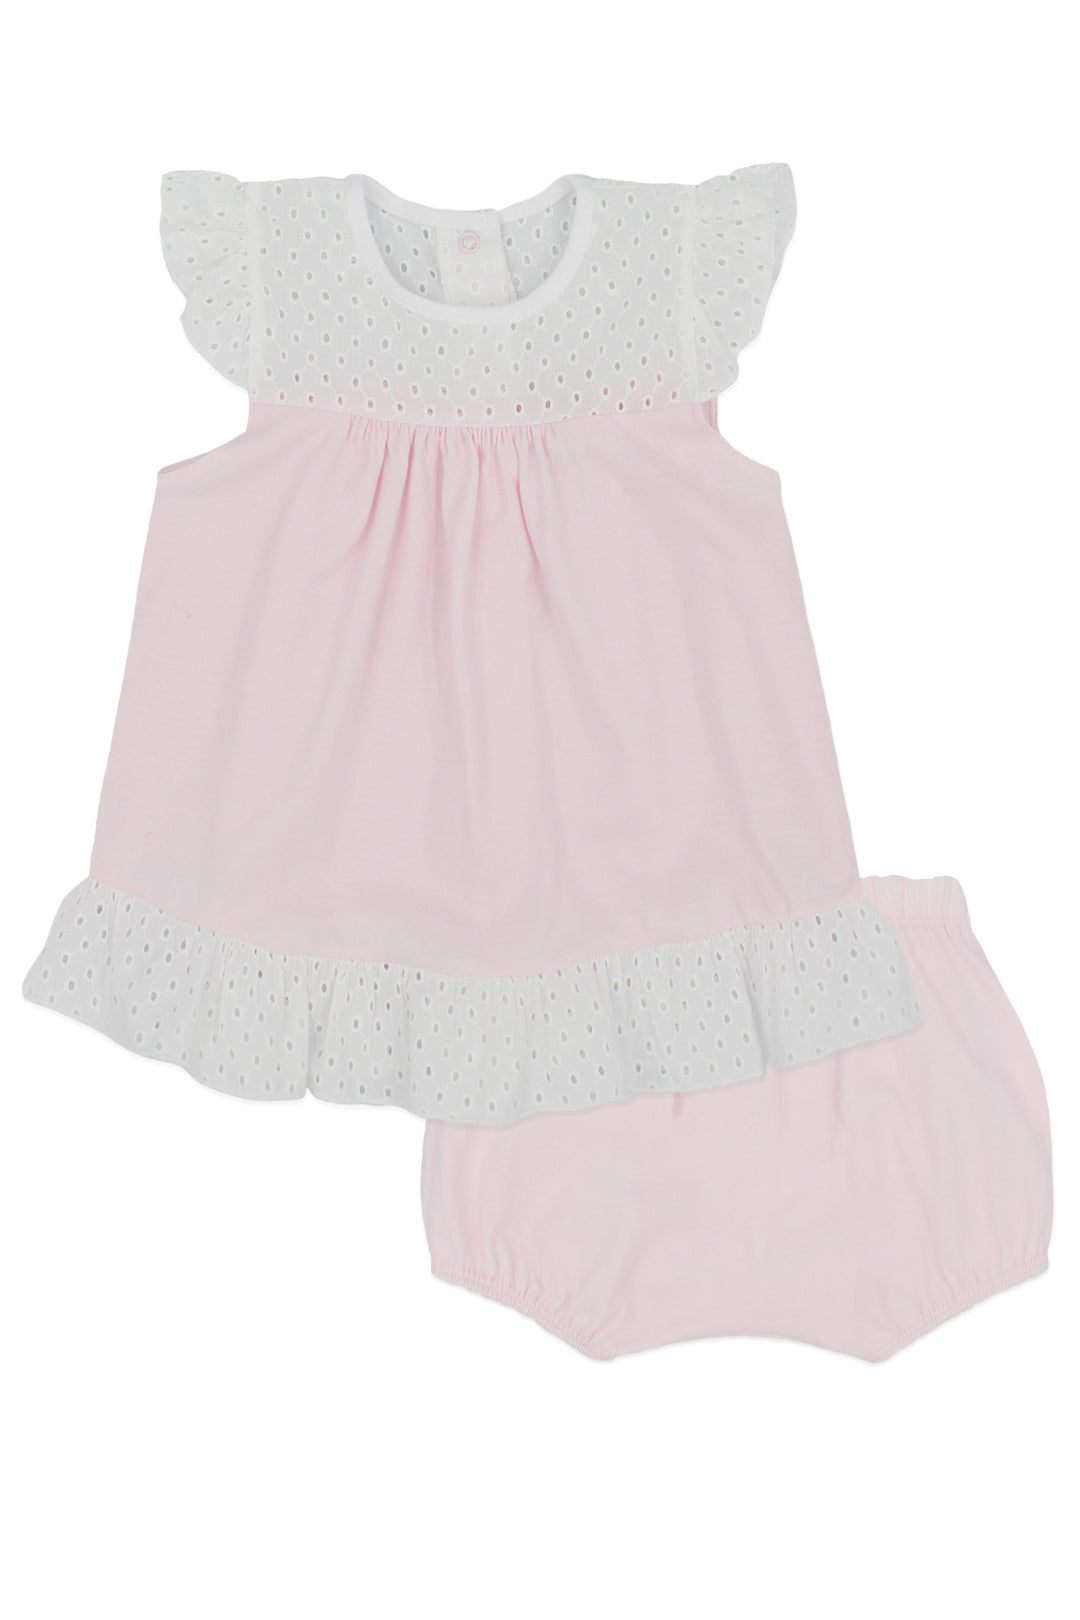 Rapife PREORDER "Madison" Pink Broderie Anglaise Top & Bloomers | Millie and John